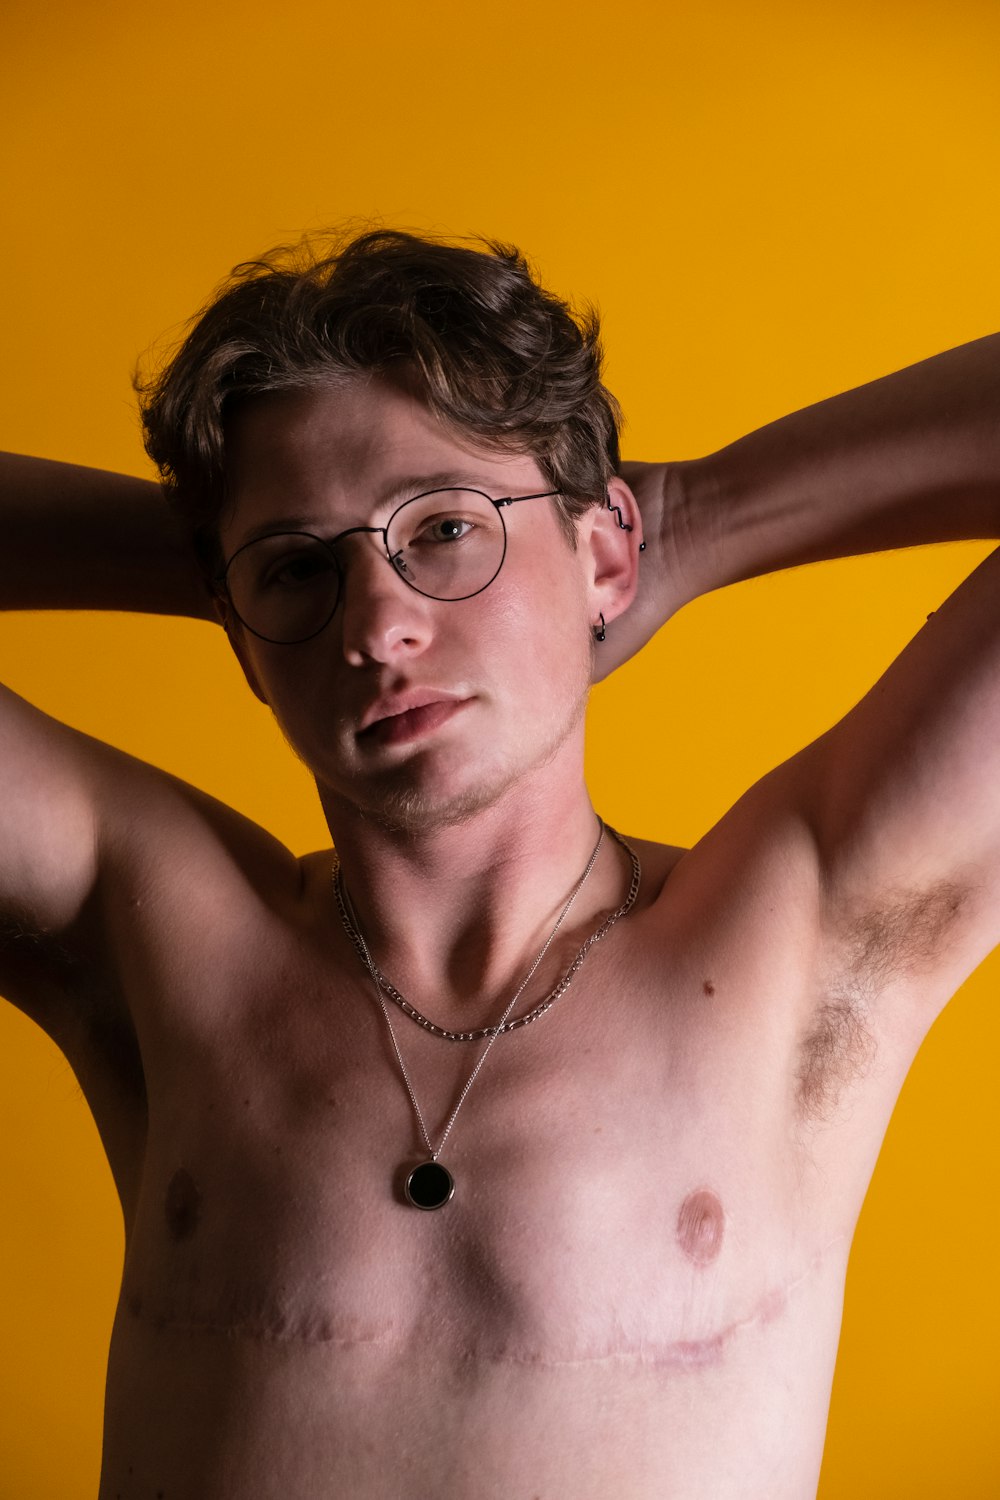 a shirtless man wearing glasses and a necklace